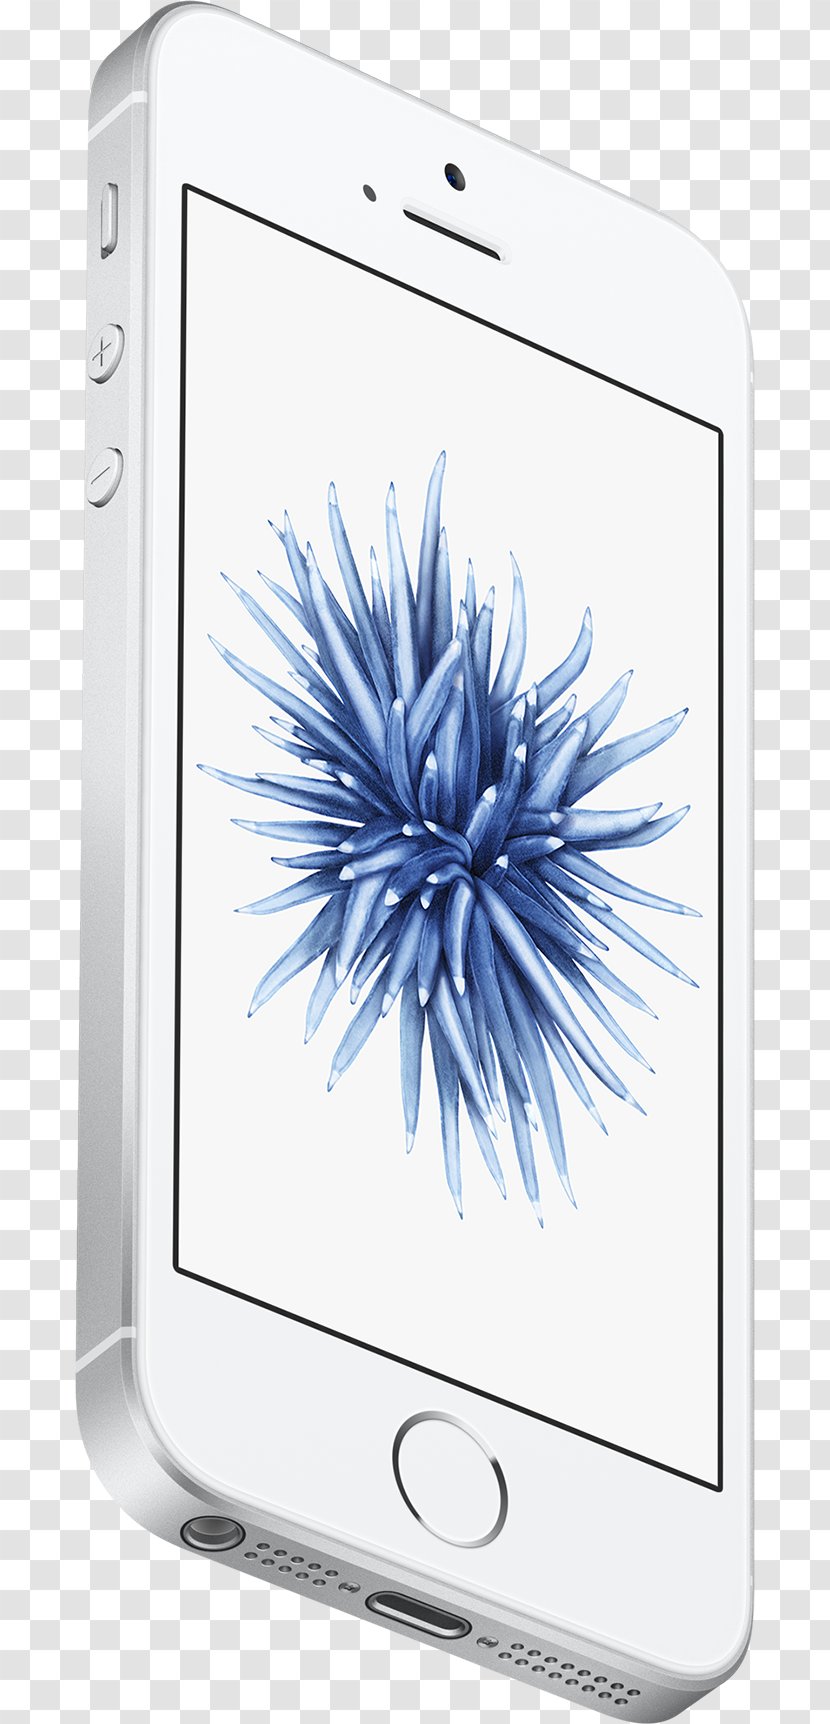 IPhone 6S Apple 4G - Iphone 6 Transparent PNG